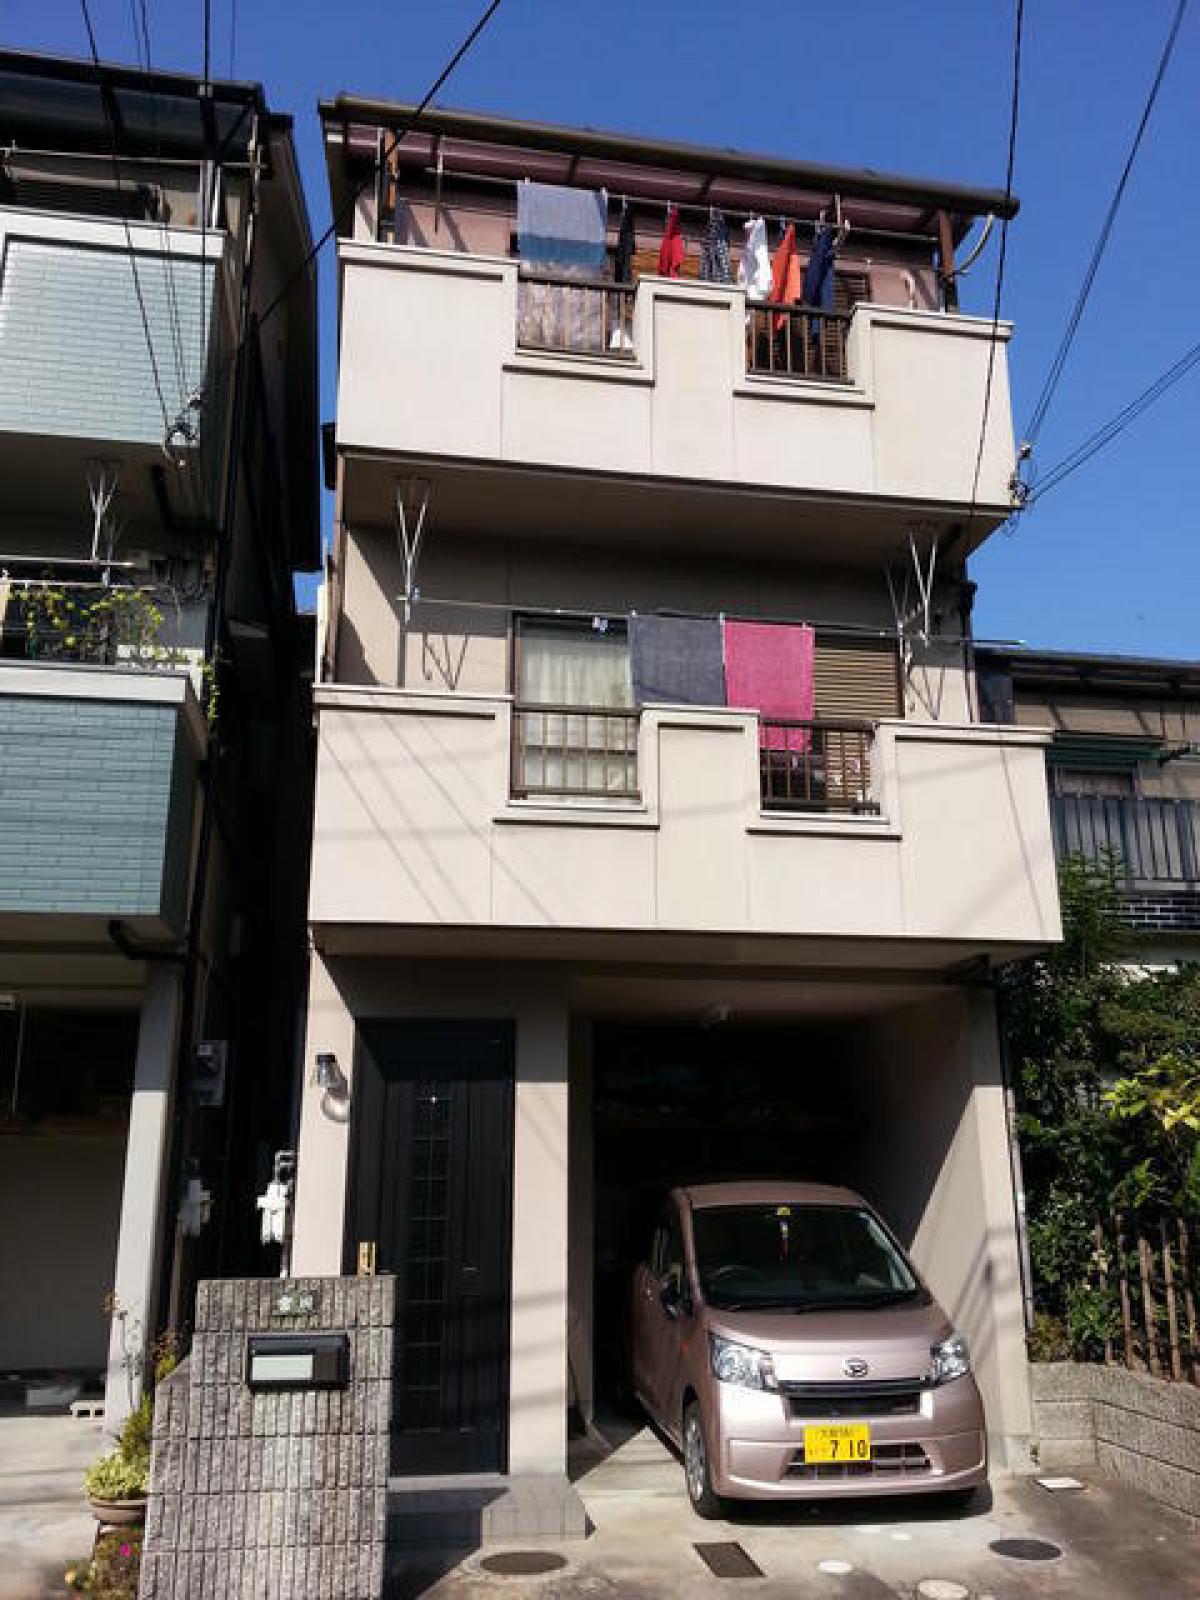 Picture of Home For Sale in Takatsuki Shi, Osaka, Japan